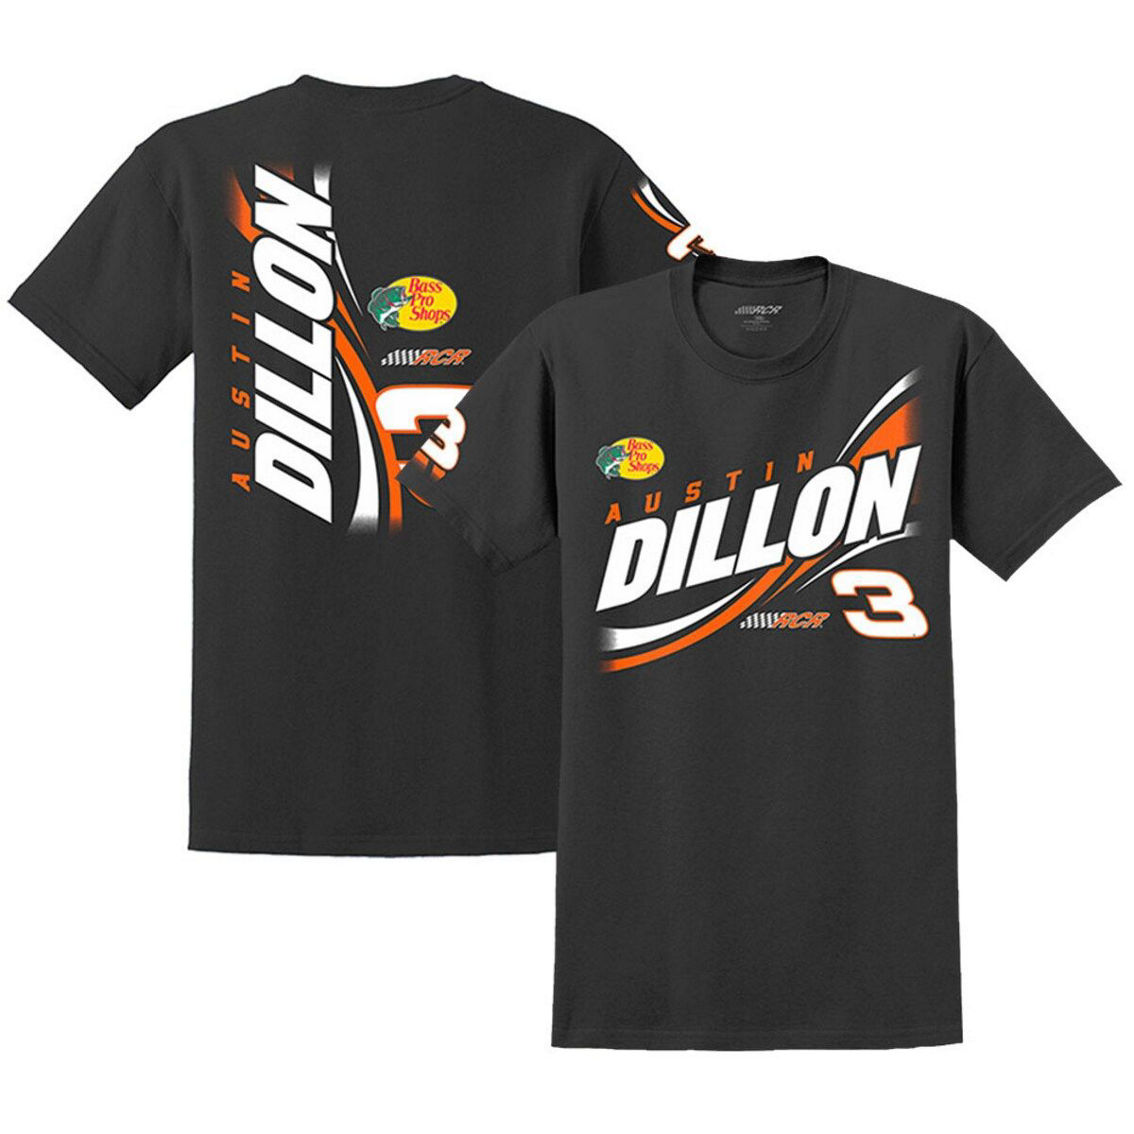 Richard Childress Racing Team Collection Men's Richard Childress Racing Team Collection Black Austin Dillon Lifestyle T-Shirt - Image 2 of 4